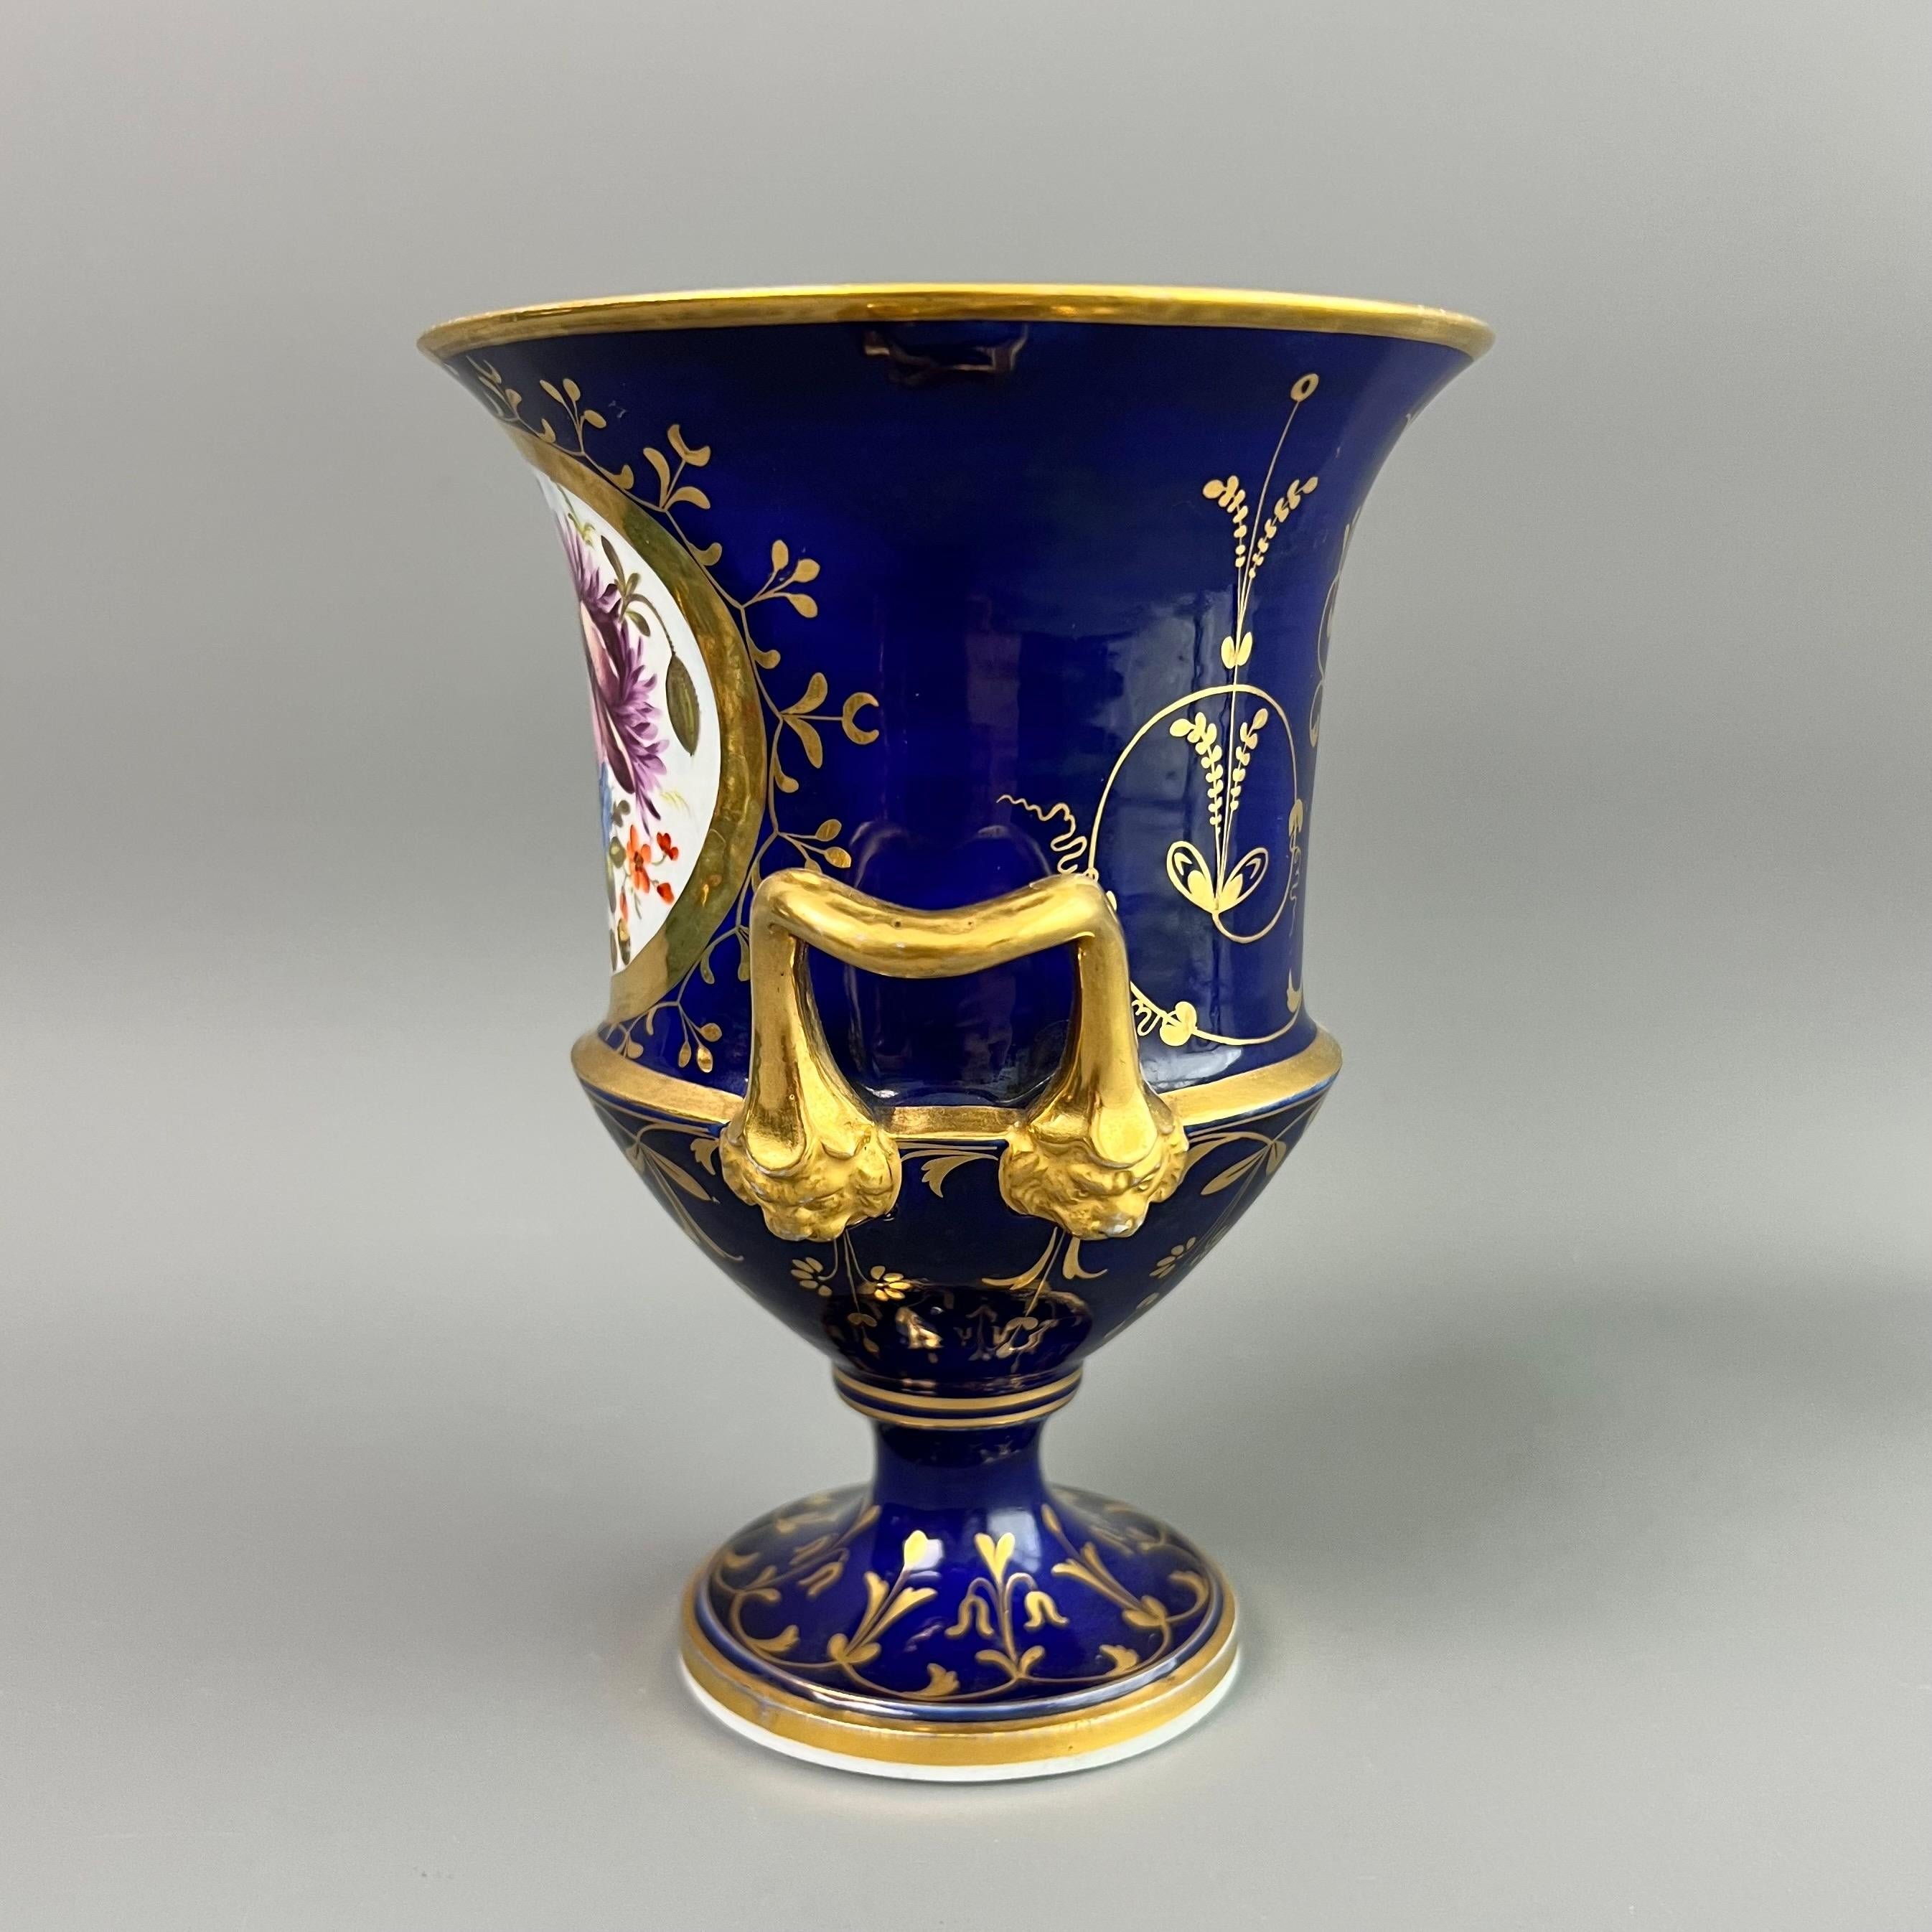 On offer is a sublime little porcelain campana vase made by Coalport in about 1815. The vase has a deep cobalt blue ground, beautiful gilding and a sublimely hand painted flower reserve.

Coalport was one of the leading potters in 19th and 20th